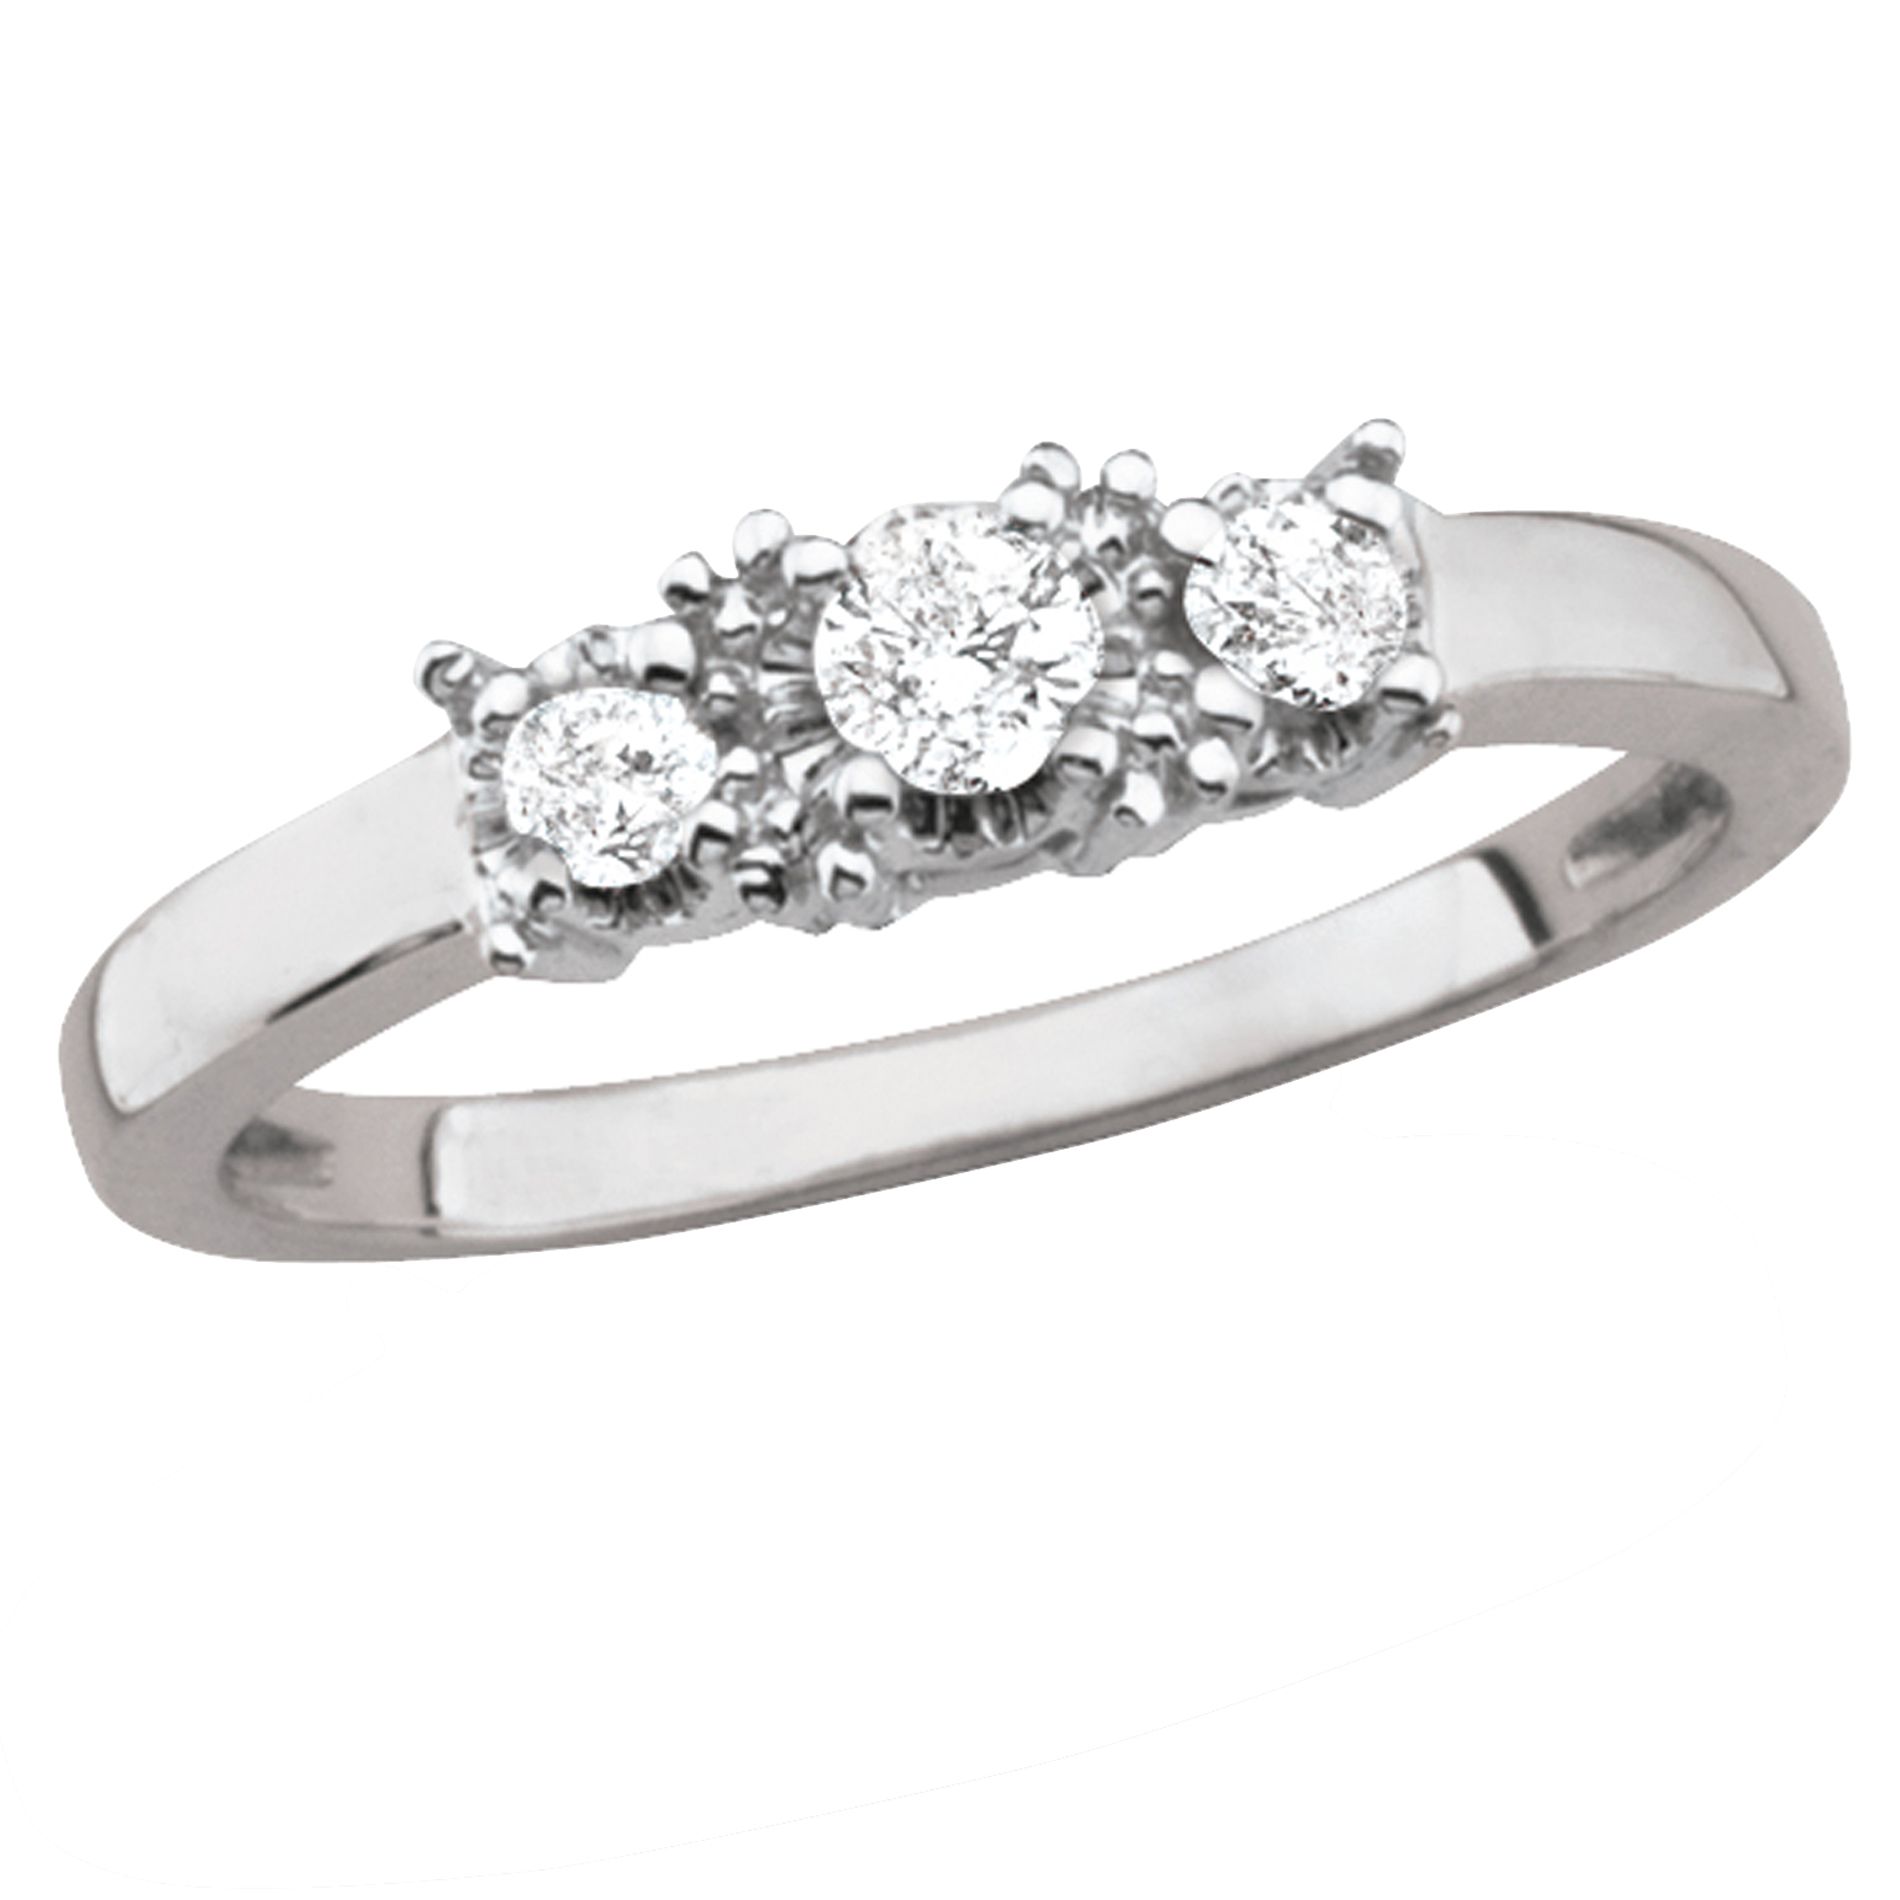 1/4 cttw Round Diamond 3-Stone Engagement Ring in 10k White Gold